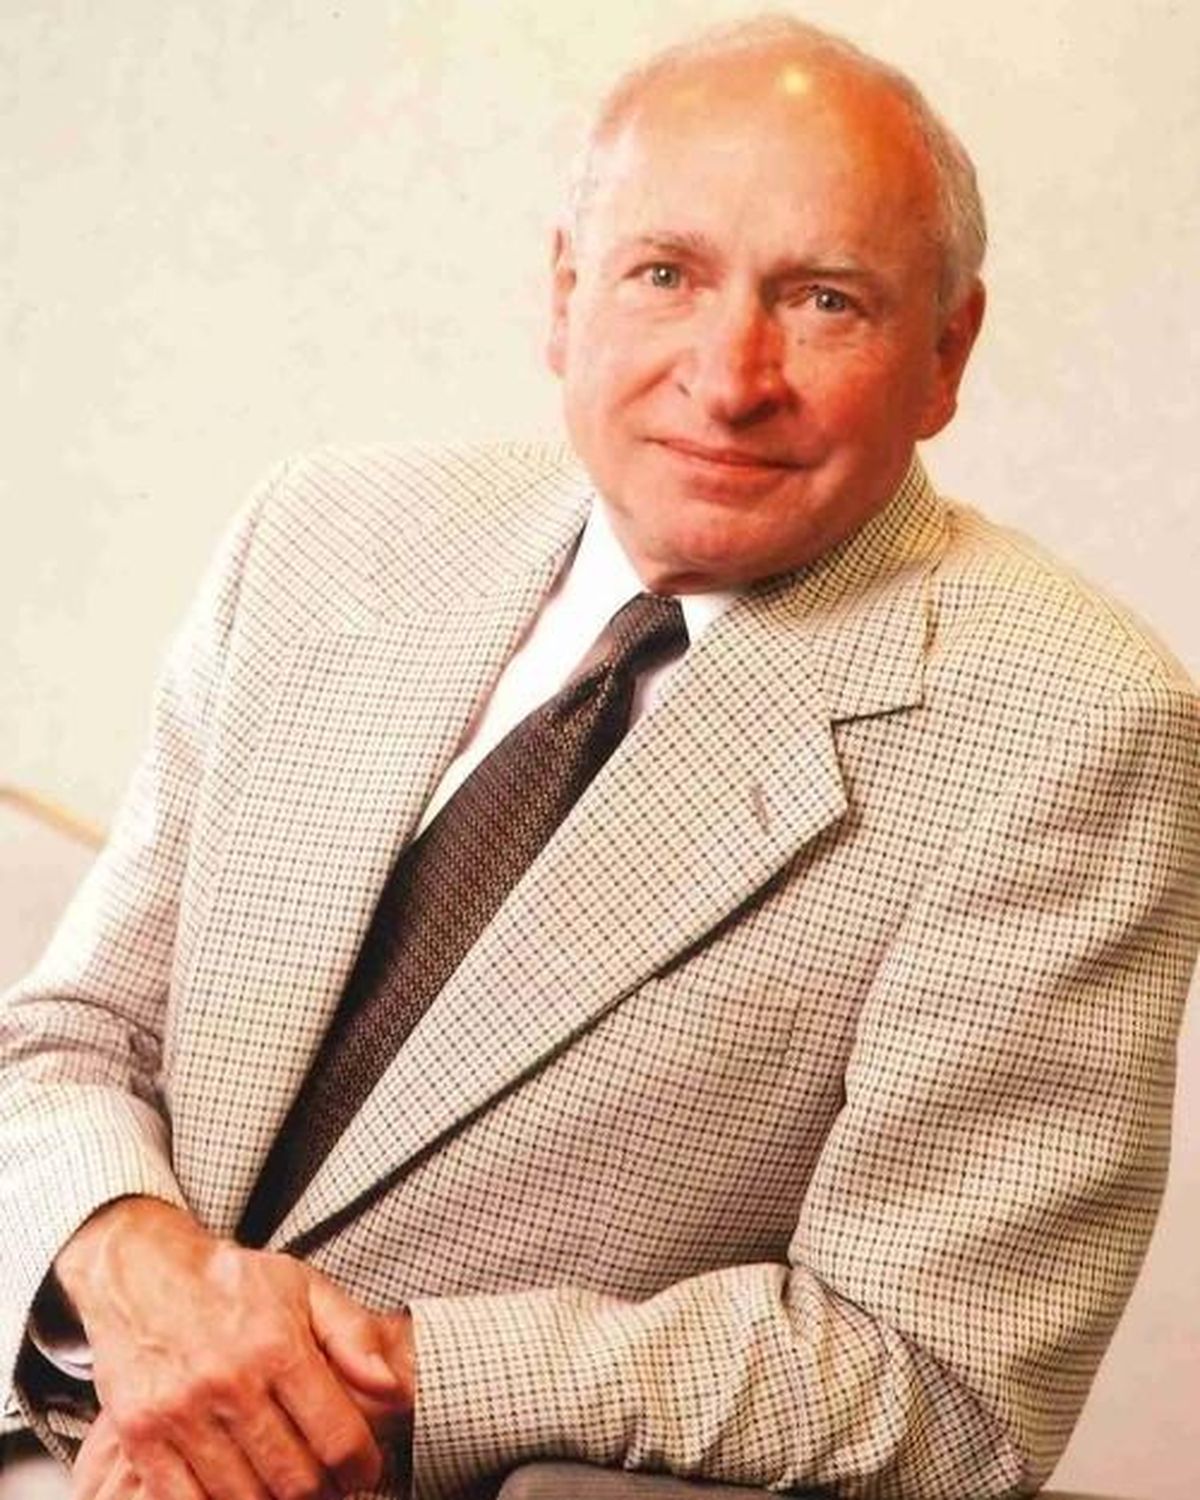 Eugene Annis, a founder of the Spokane law firm Lukins & Annis, died on Oct. 8, 2019. (Hennessey Funeral Home & Crematory)